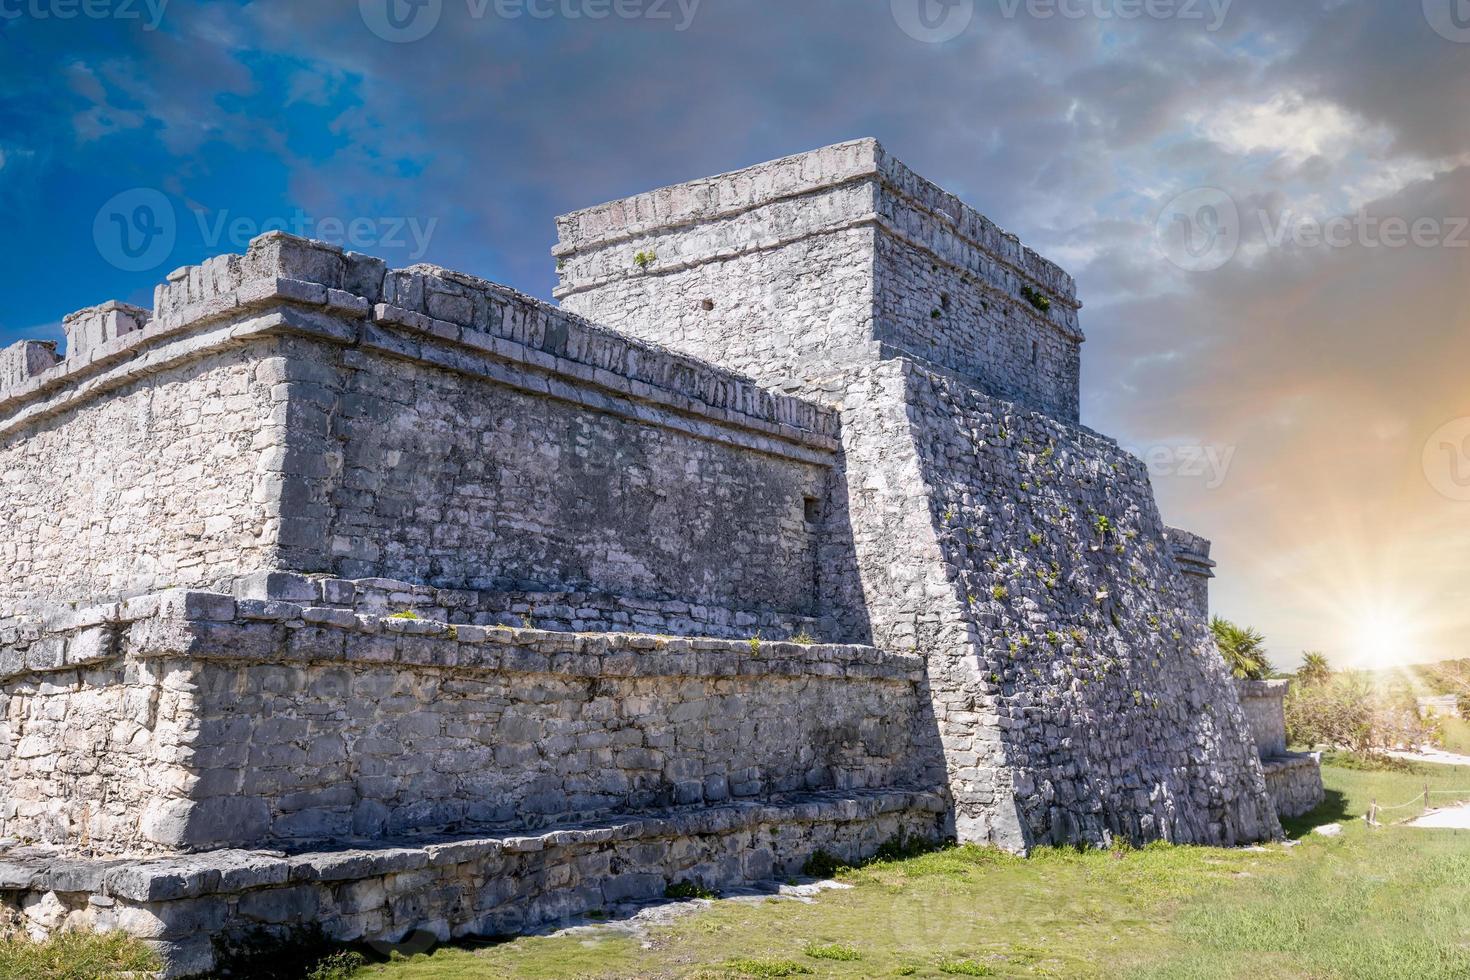 Pyramid El Castillo, the Castle, in Tulum Archaeological Zone with Mayan pyramids and ruins located on the scenic ocean shore of Quintana Roo province photo